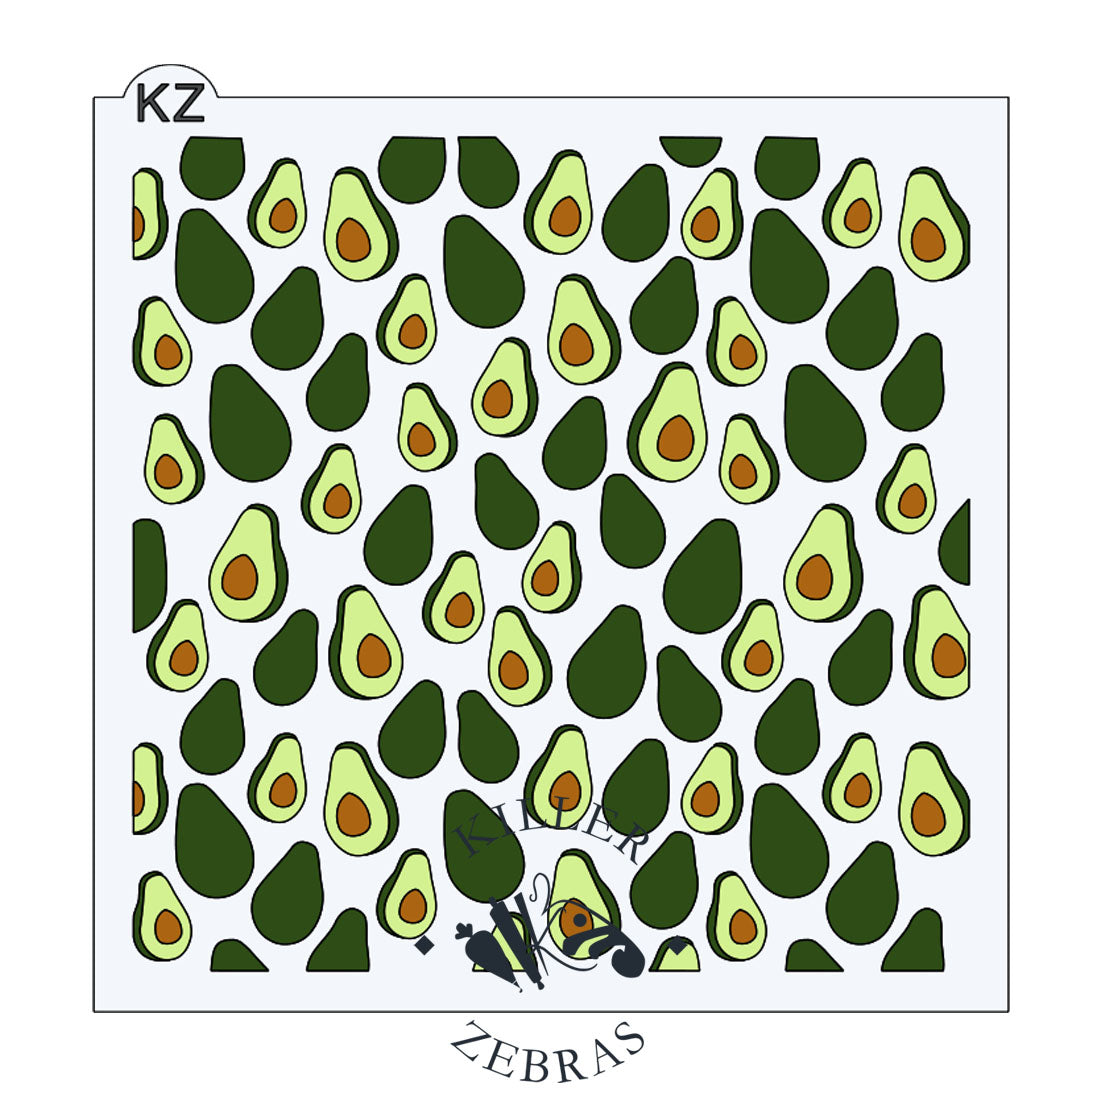 Large, square stencil with whole and half avocados filling square. Dark and light green with brown pits.